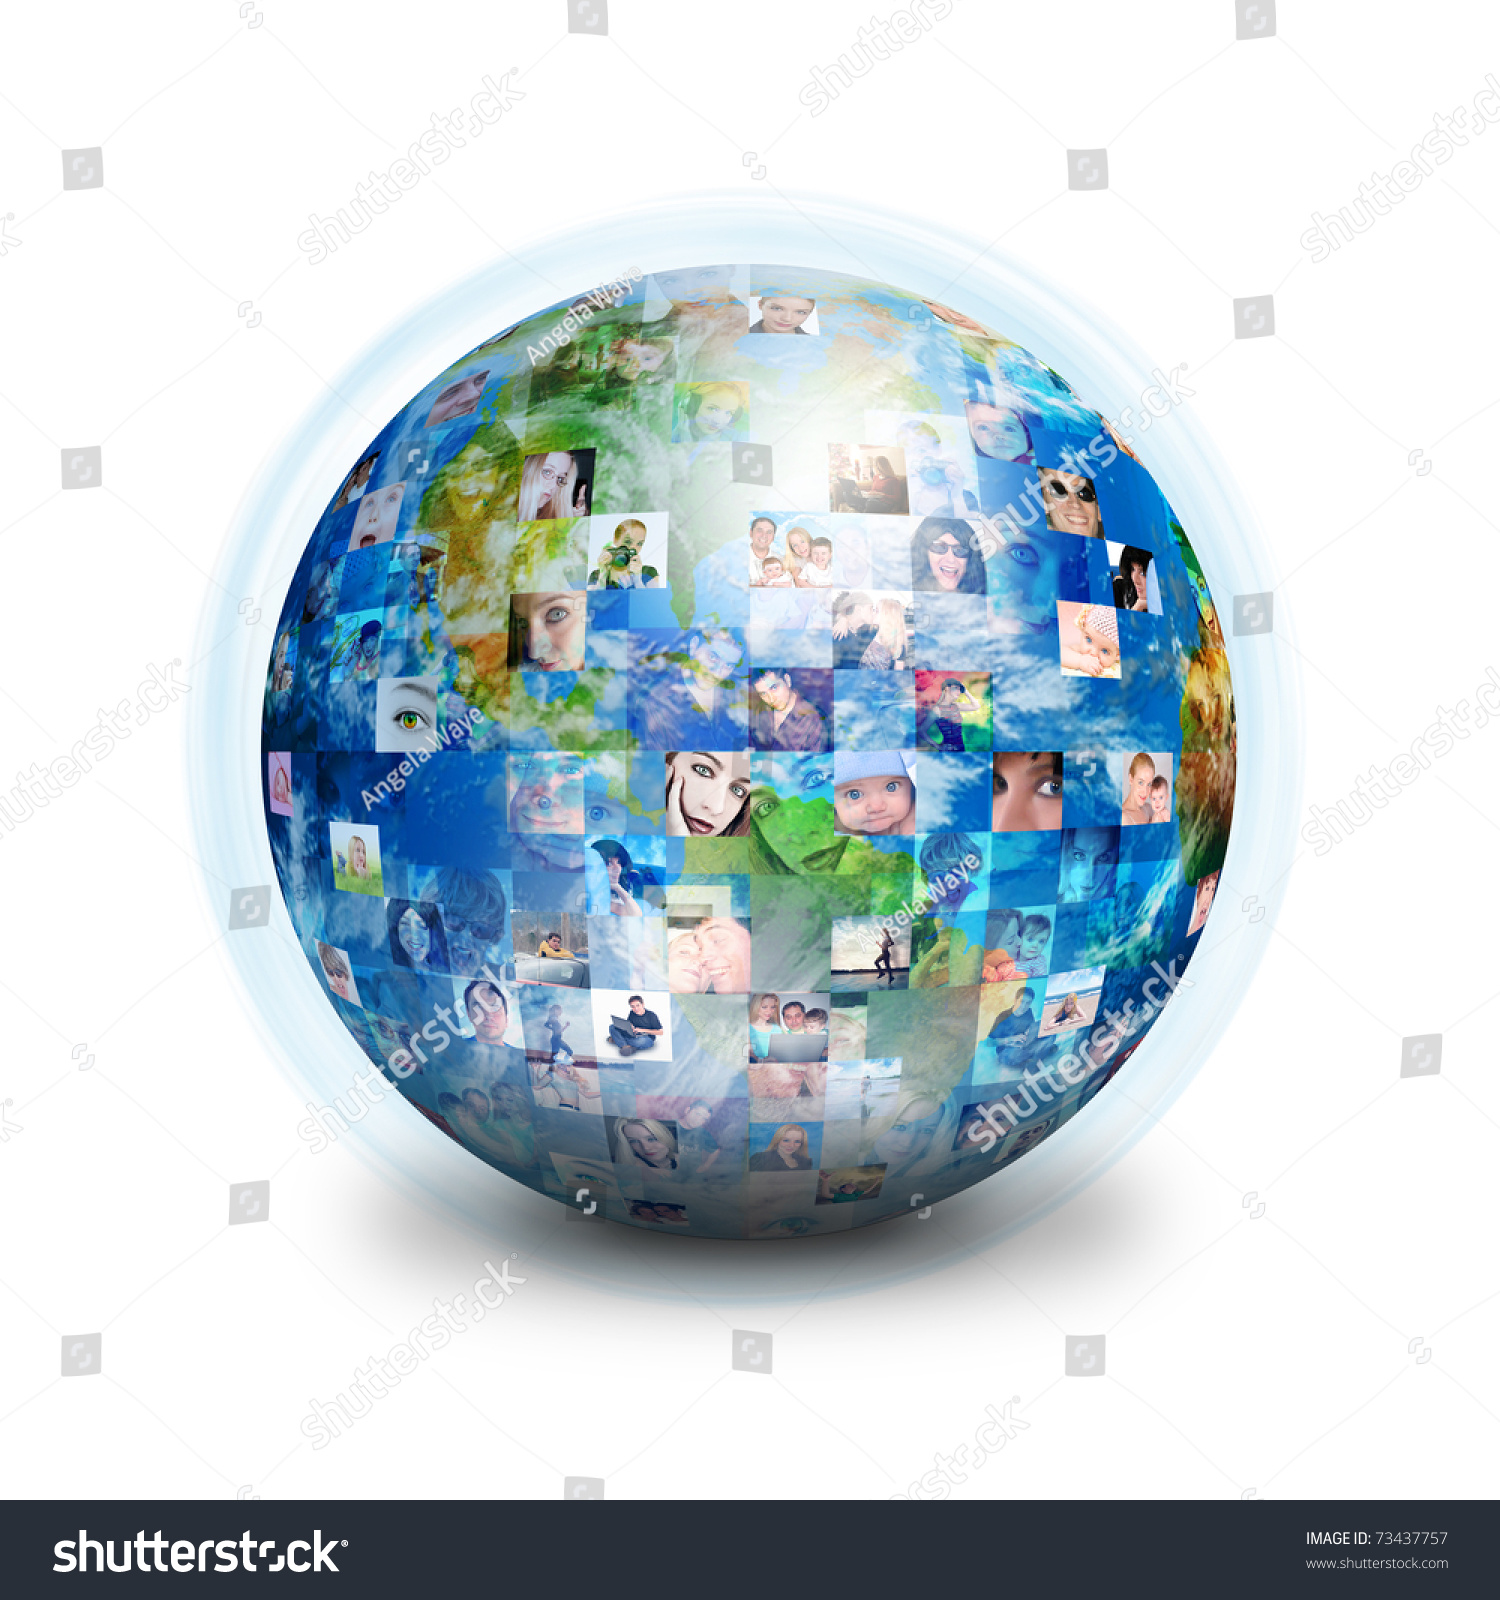 A globe is isolated on a white background with many different people's faces. Can represent a technology social network of friends and communication. #73437757